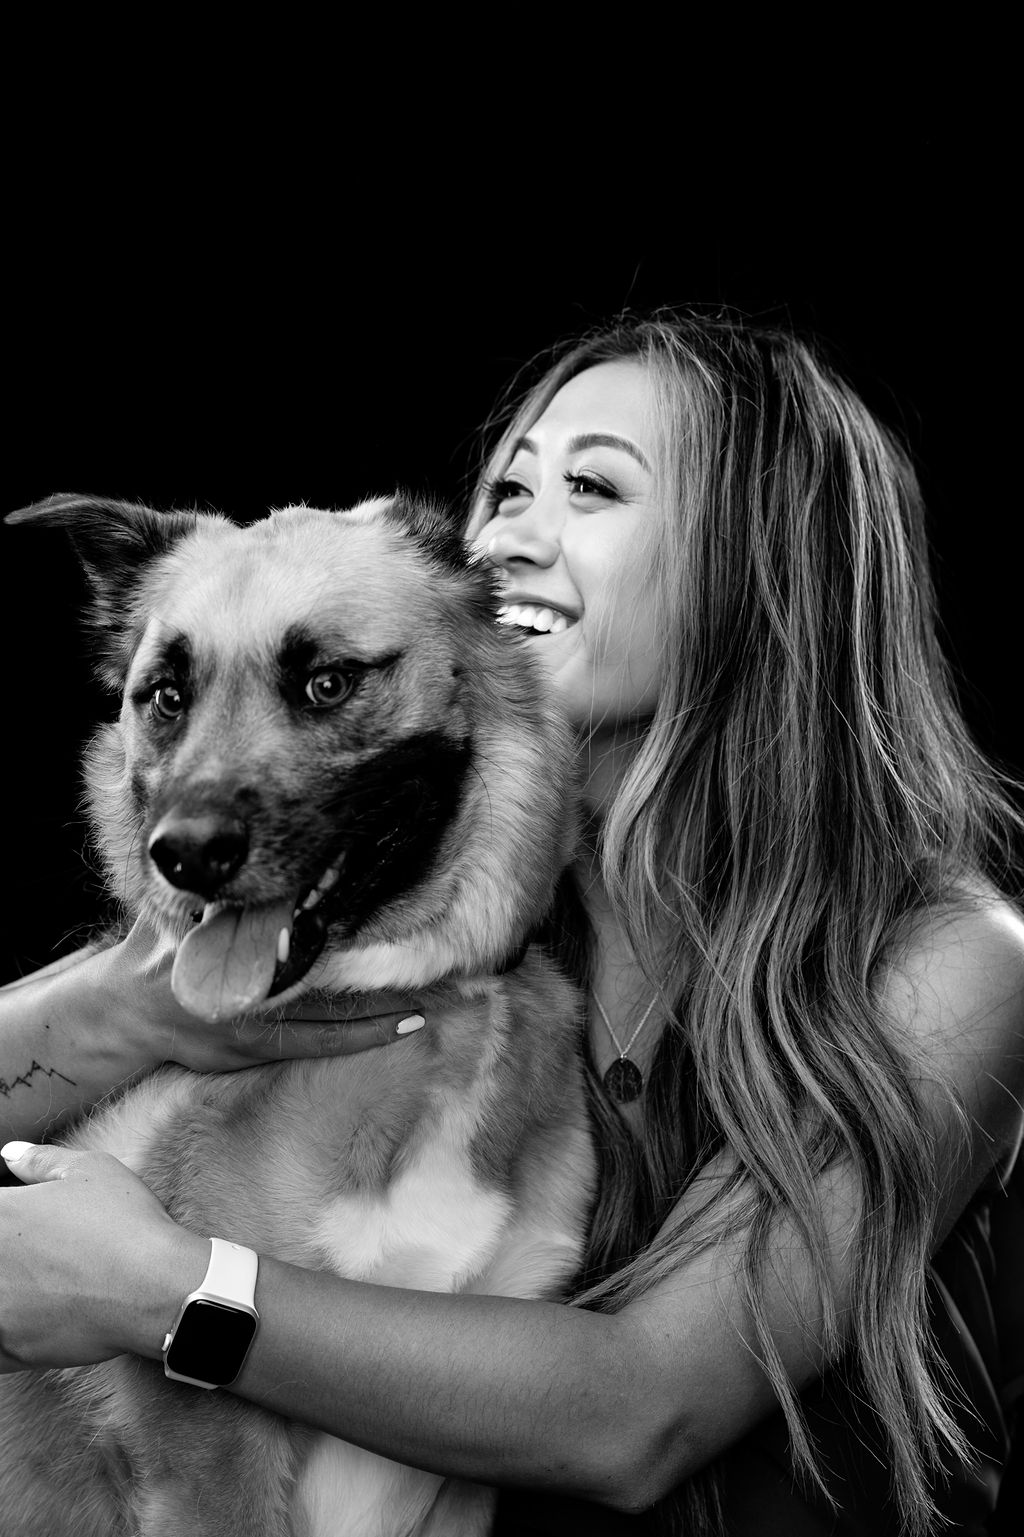 studio photoshoot with dog Joey and his mom. The picture is black and white and both are looking to the side smiling